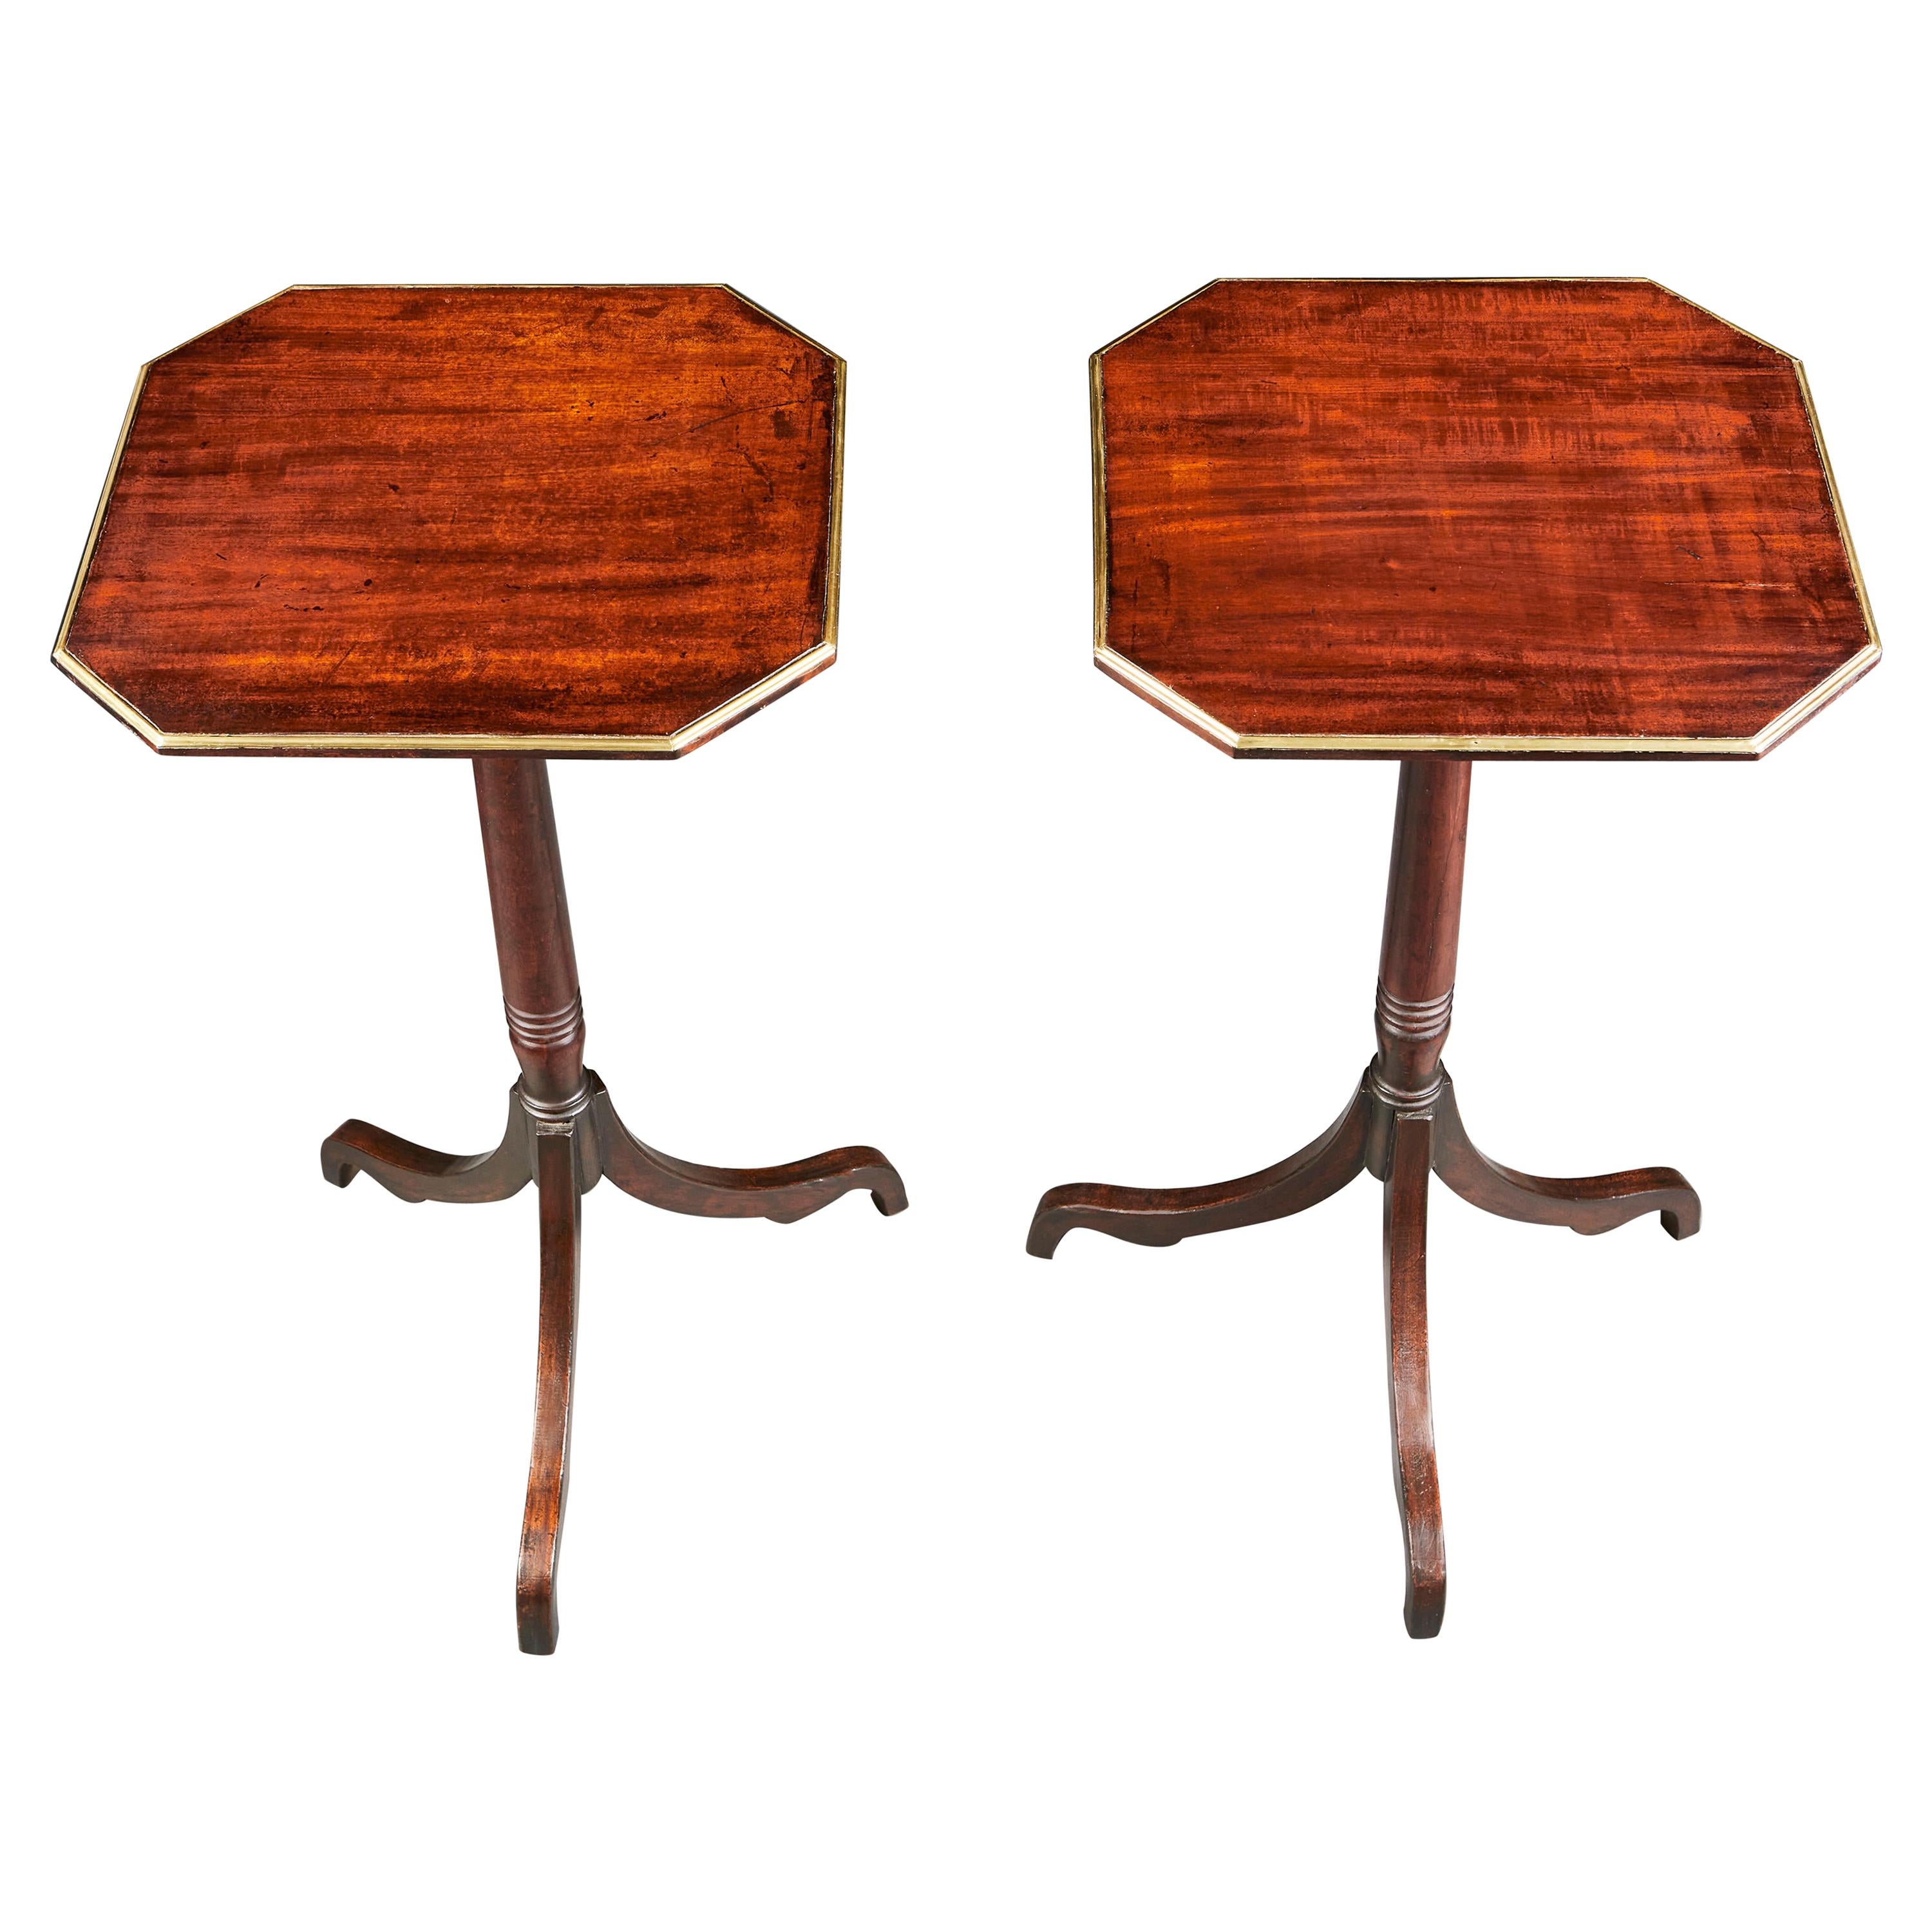 Pair of 19th Century Mahogany Wood and Brass Banded Tripod Tables